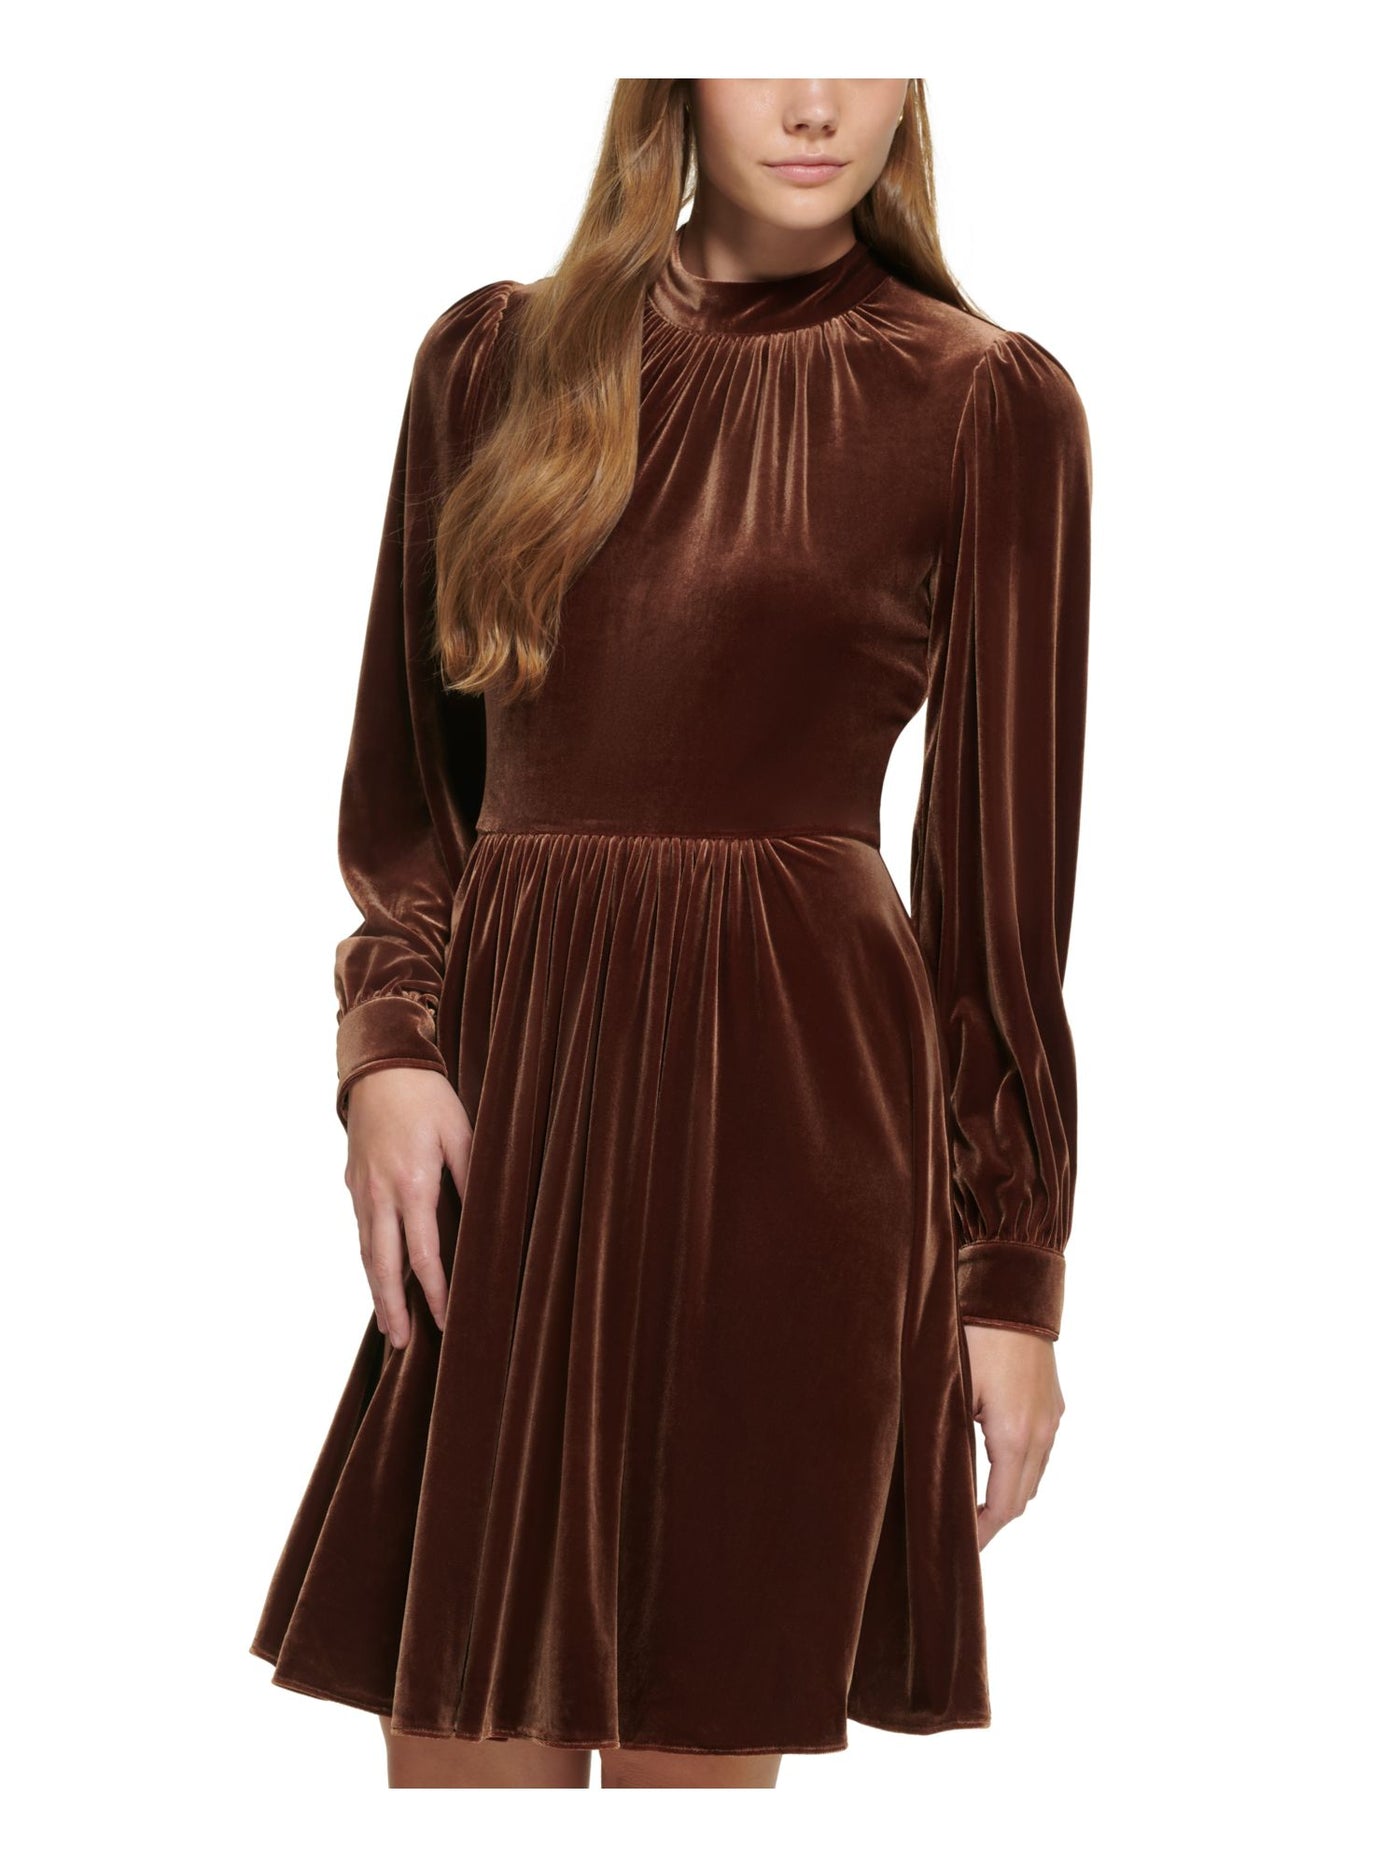 CALVIN KLEIN Womens Brown Zippered Unlined Gathered Long Sleeve Mock Neck Above The Knee Fit + Flare Dress 14